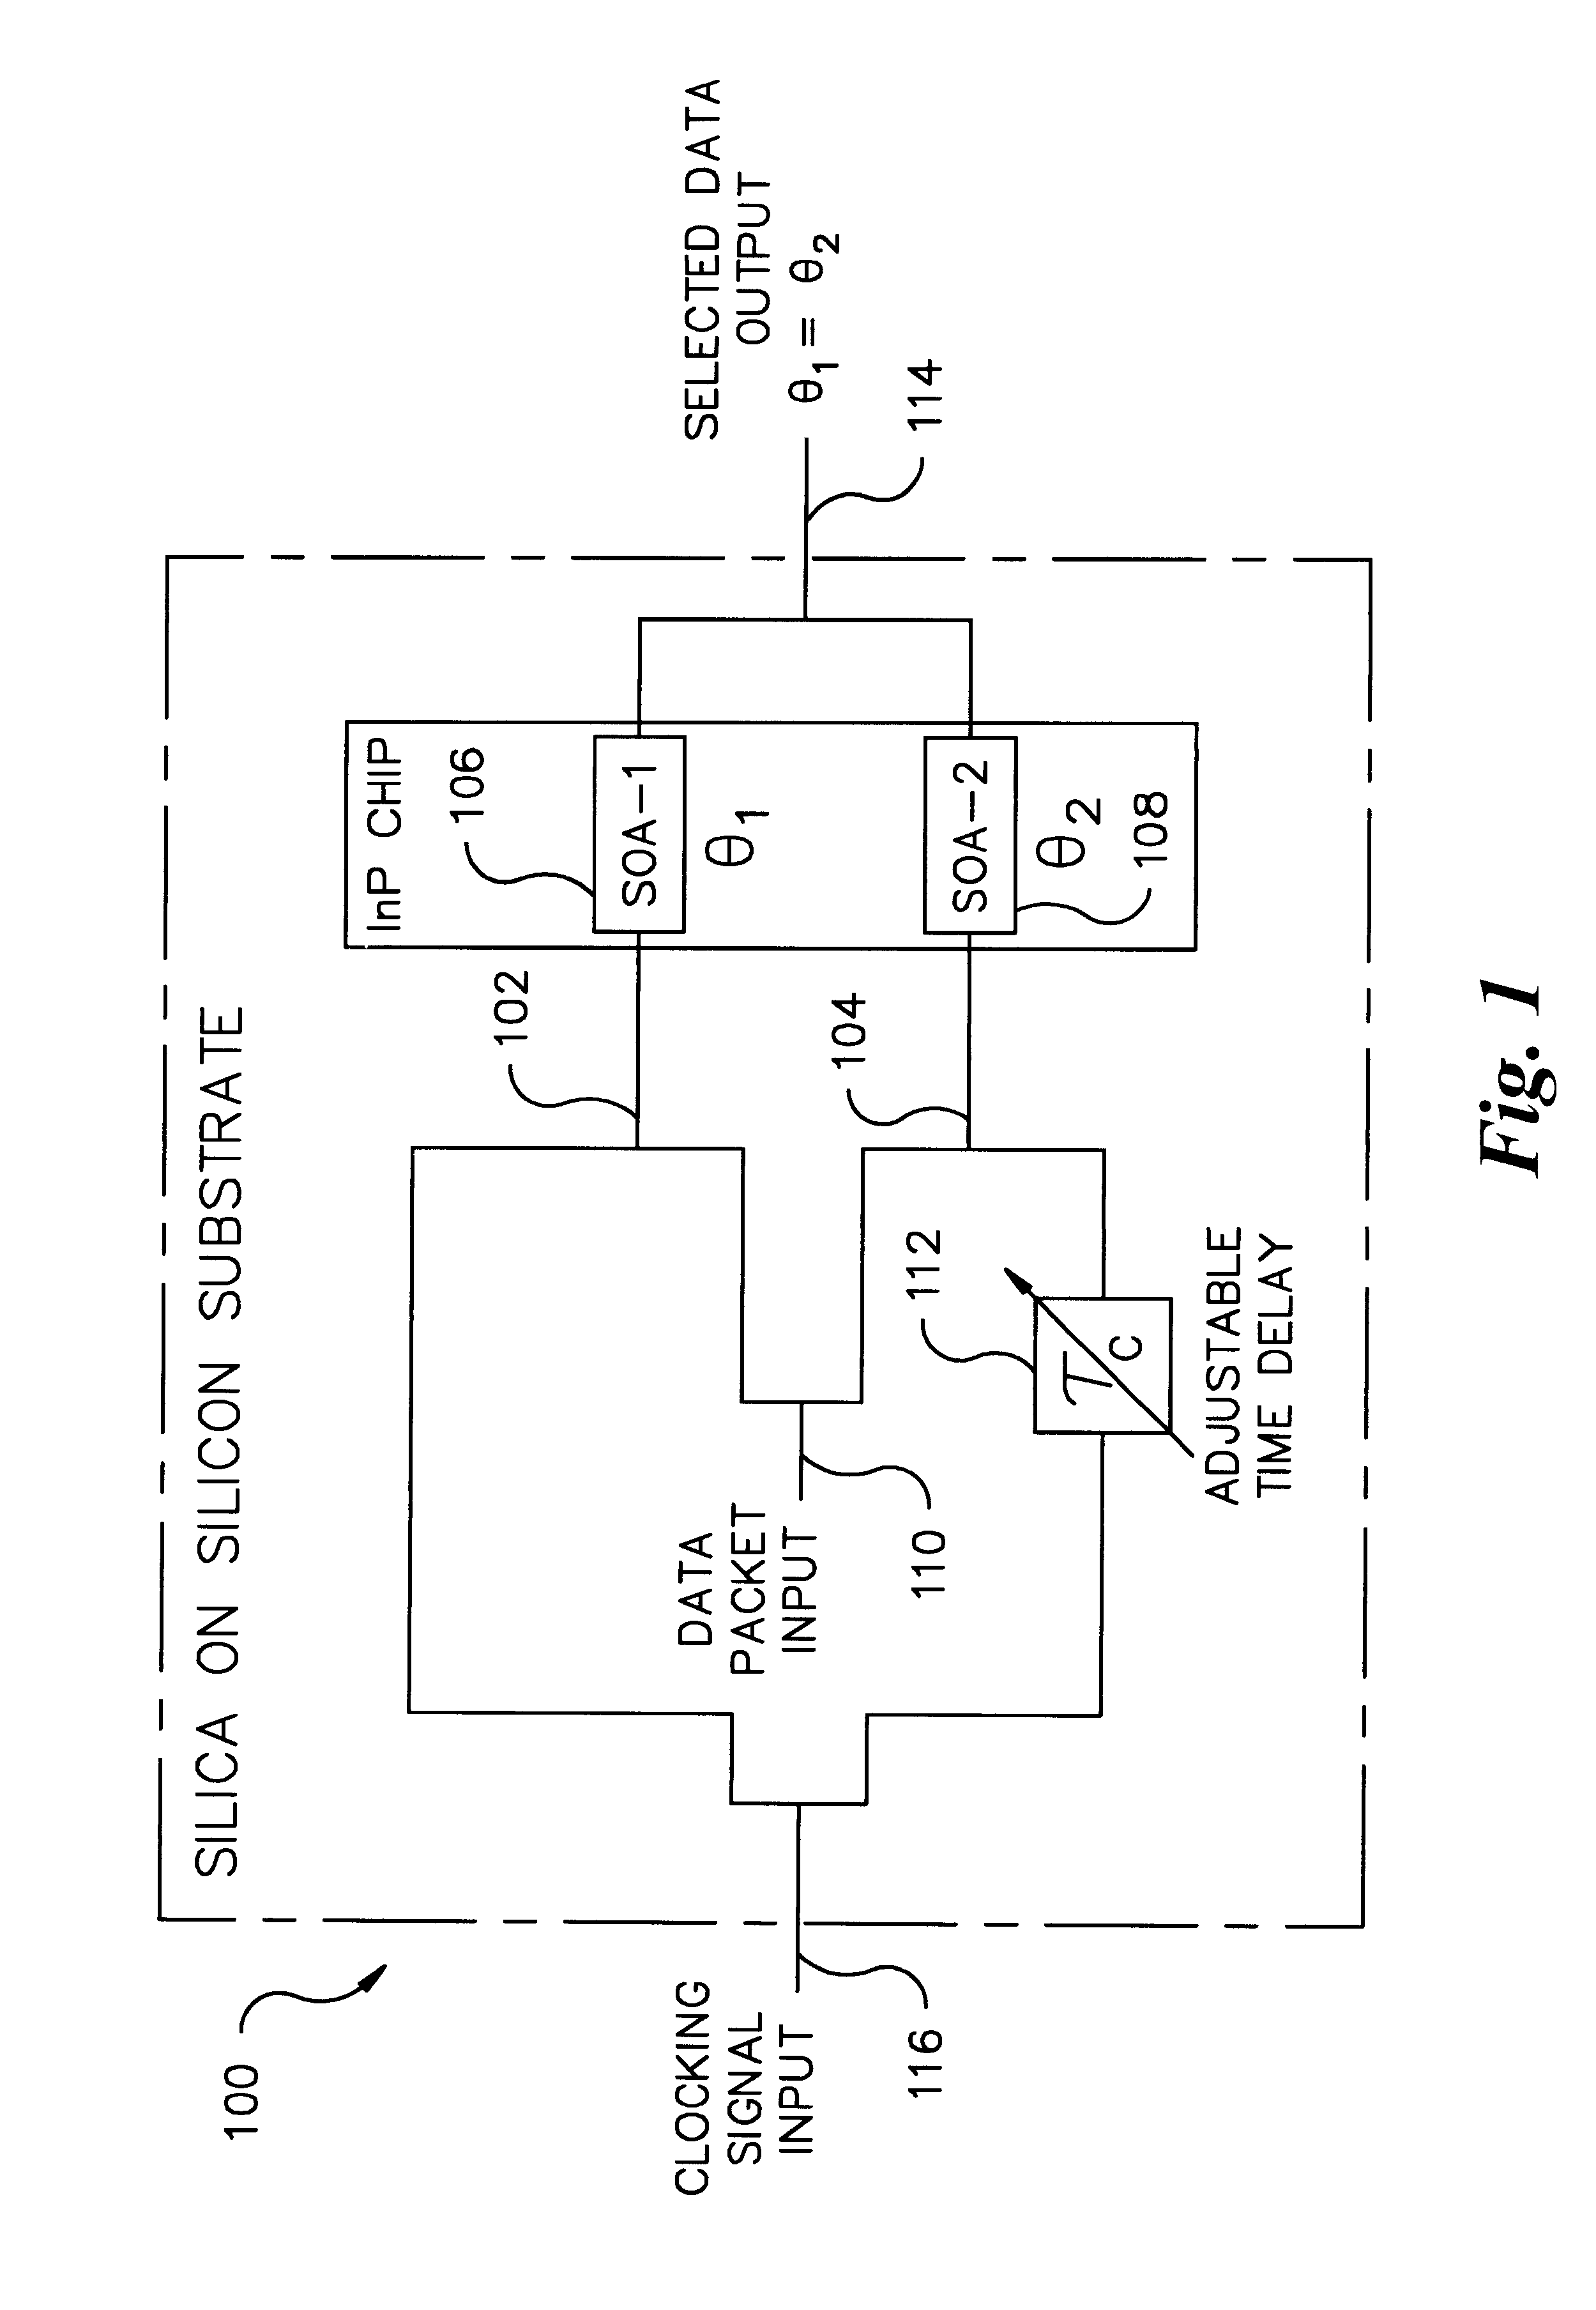 Time slot tunable all-optical packet data demultiplexer